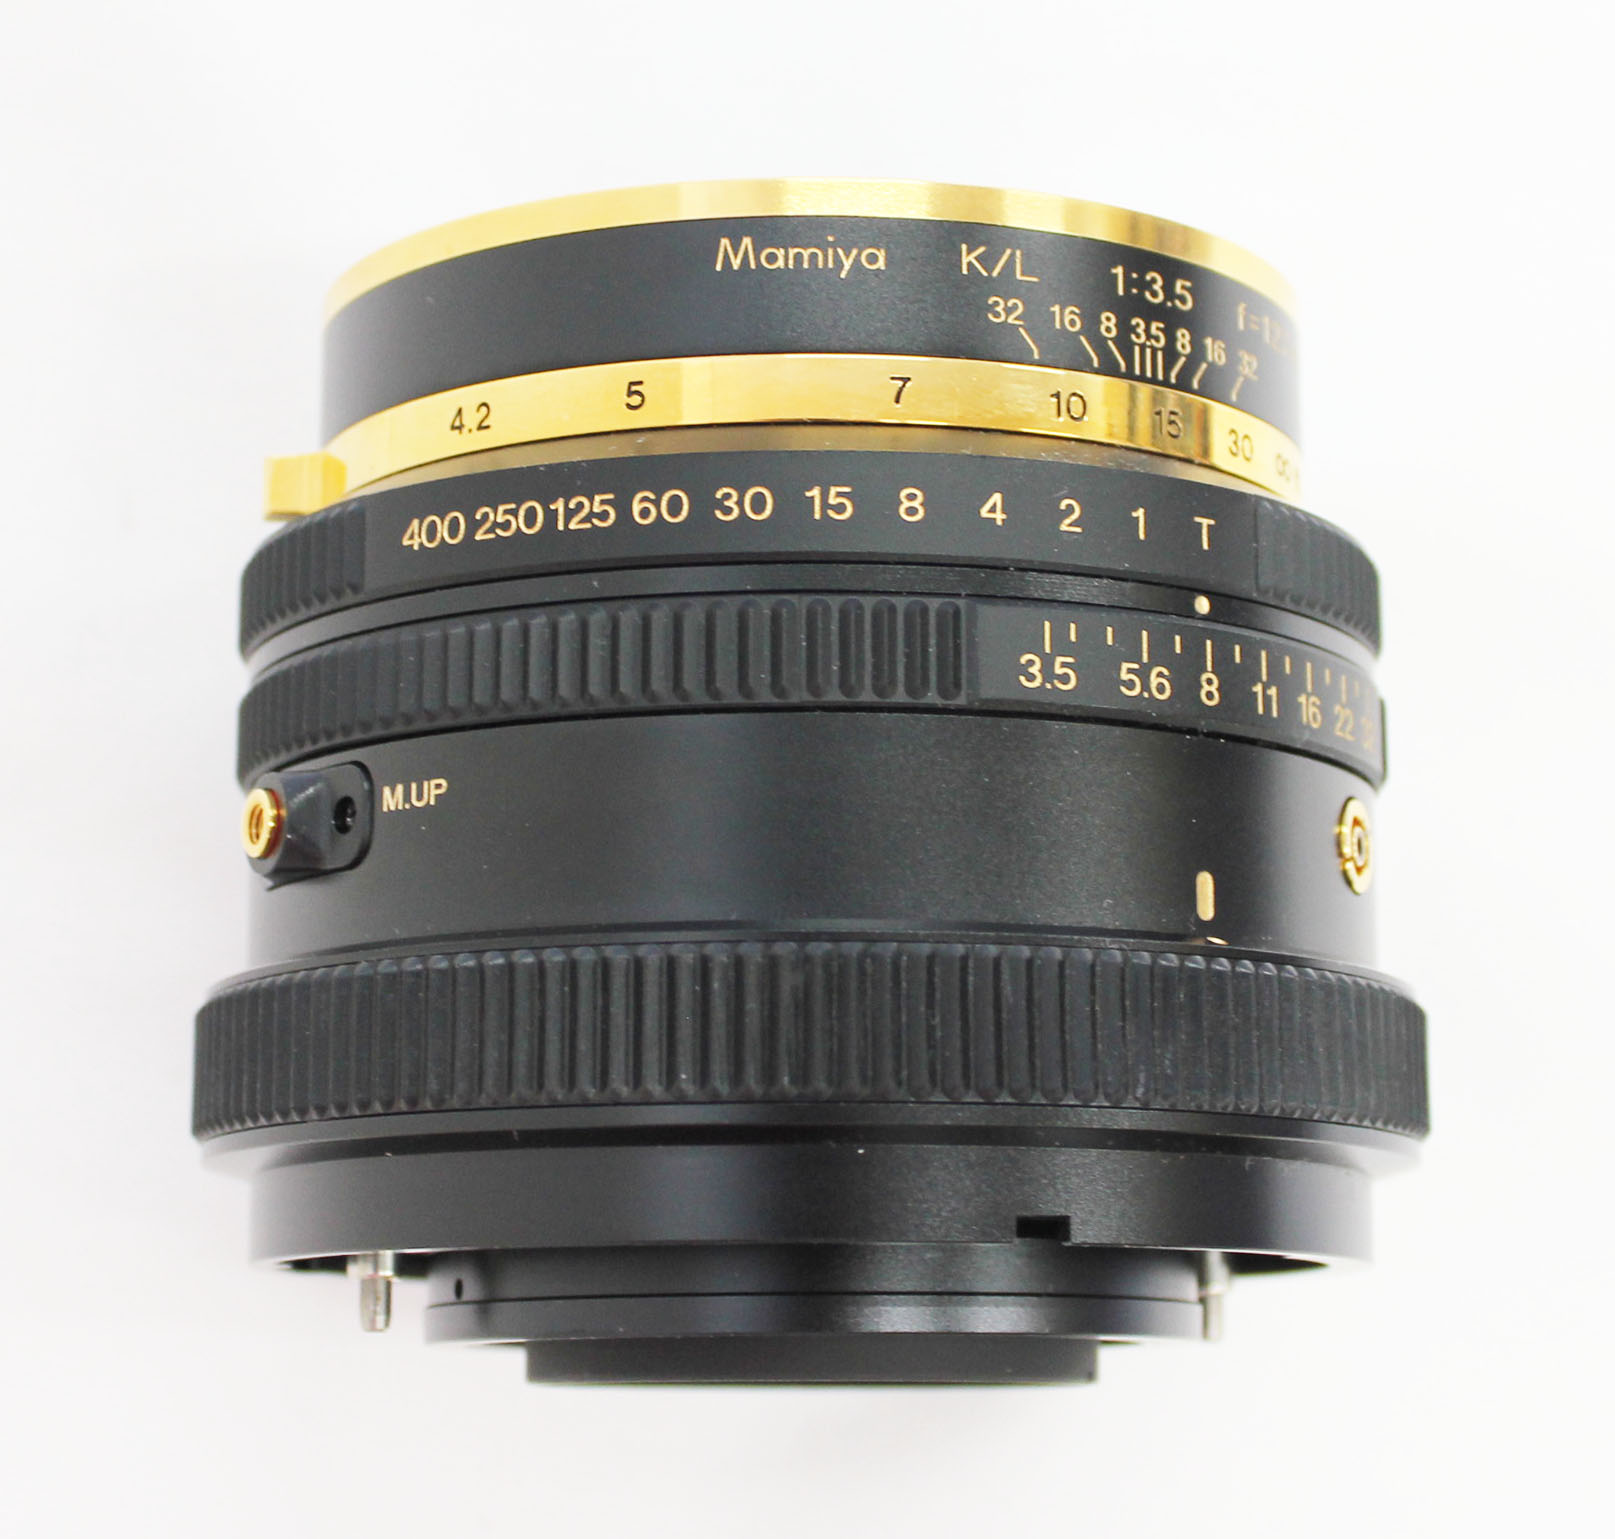 Mamiya RB67 Pro SD Gold K/L 127mm F/3.5 50 Years Limited Edition of 300 from Japan Photo 15